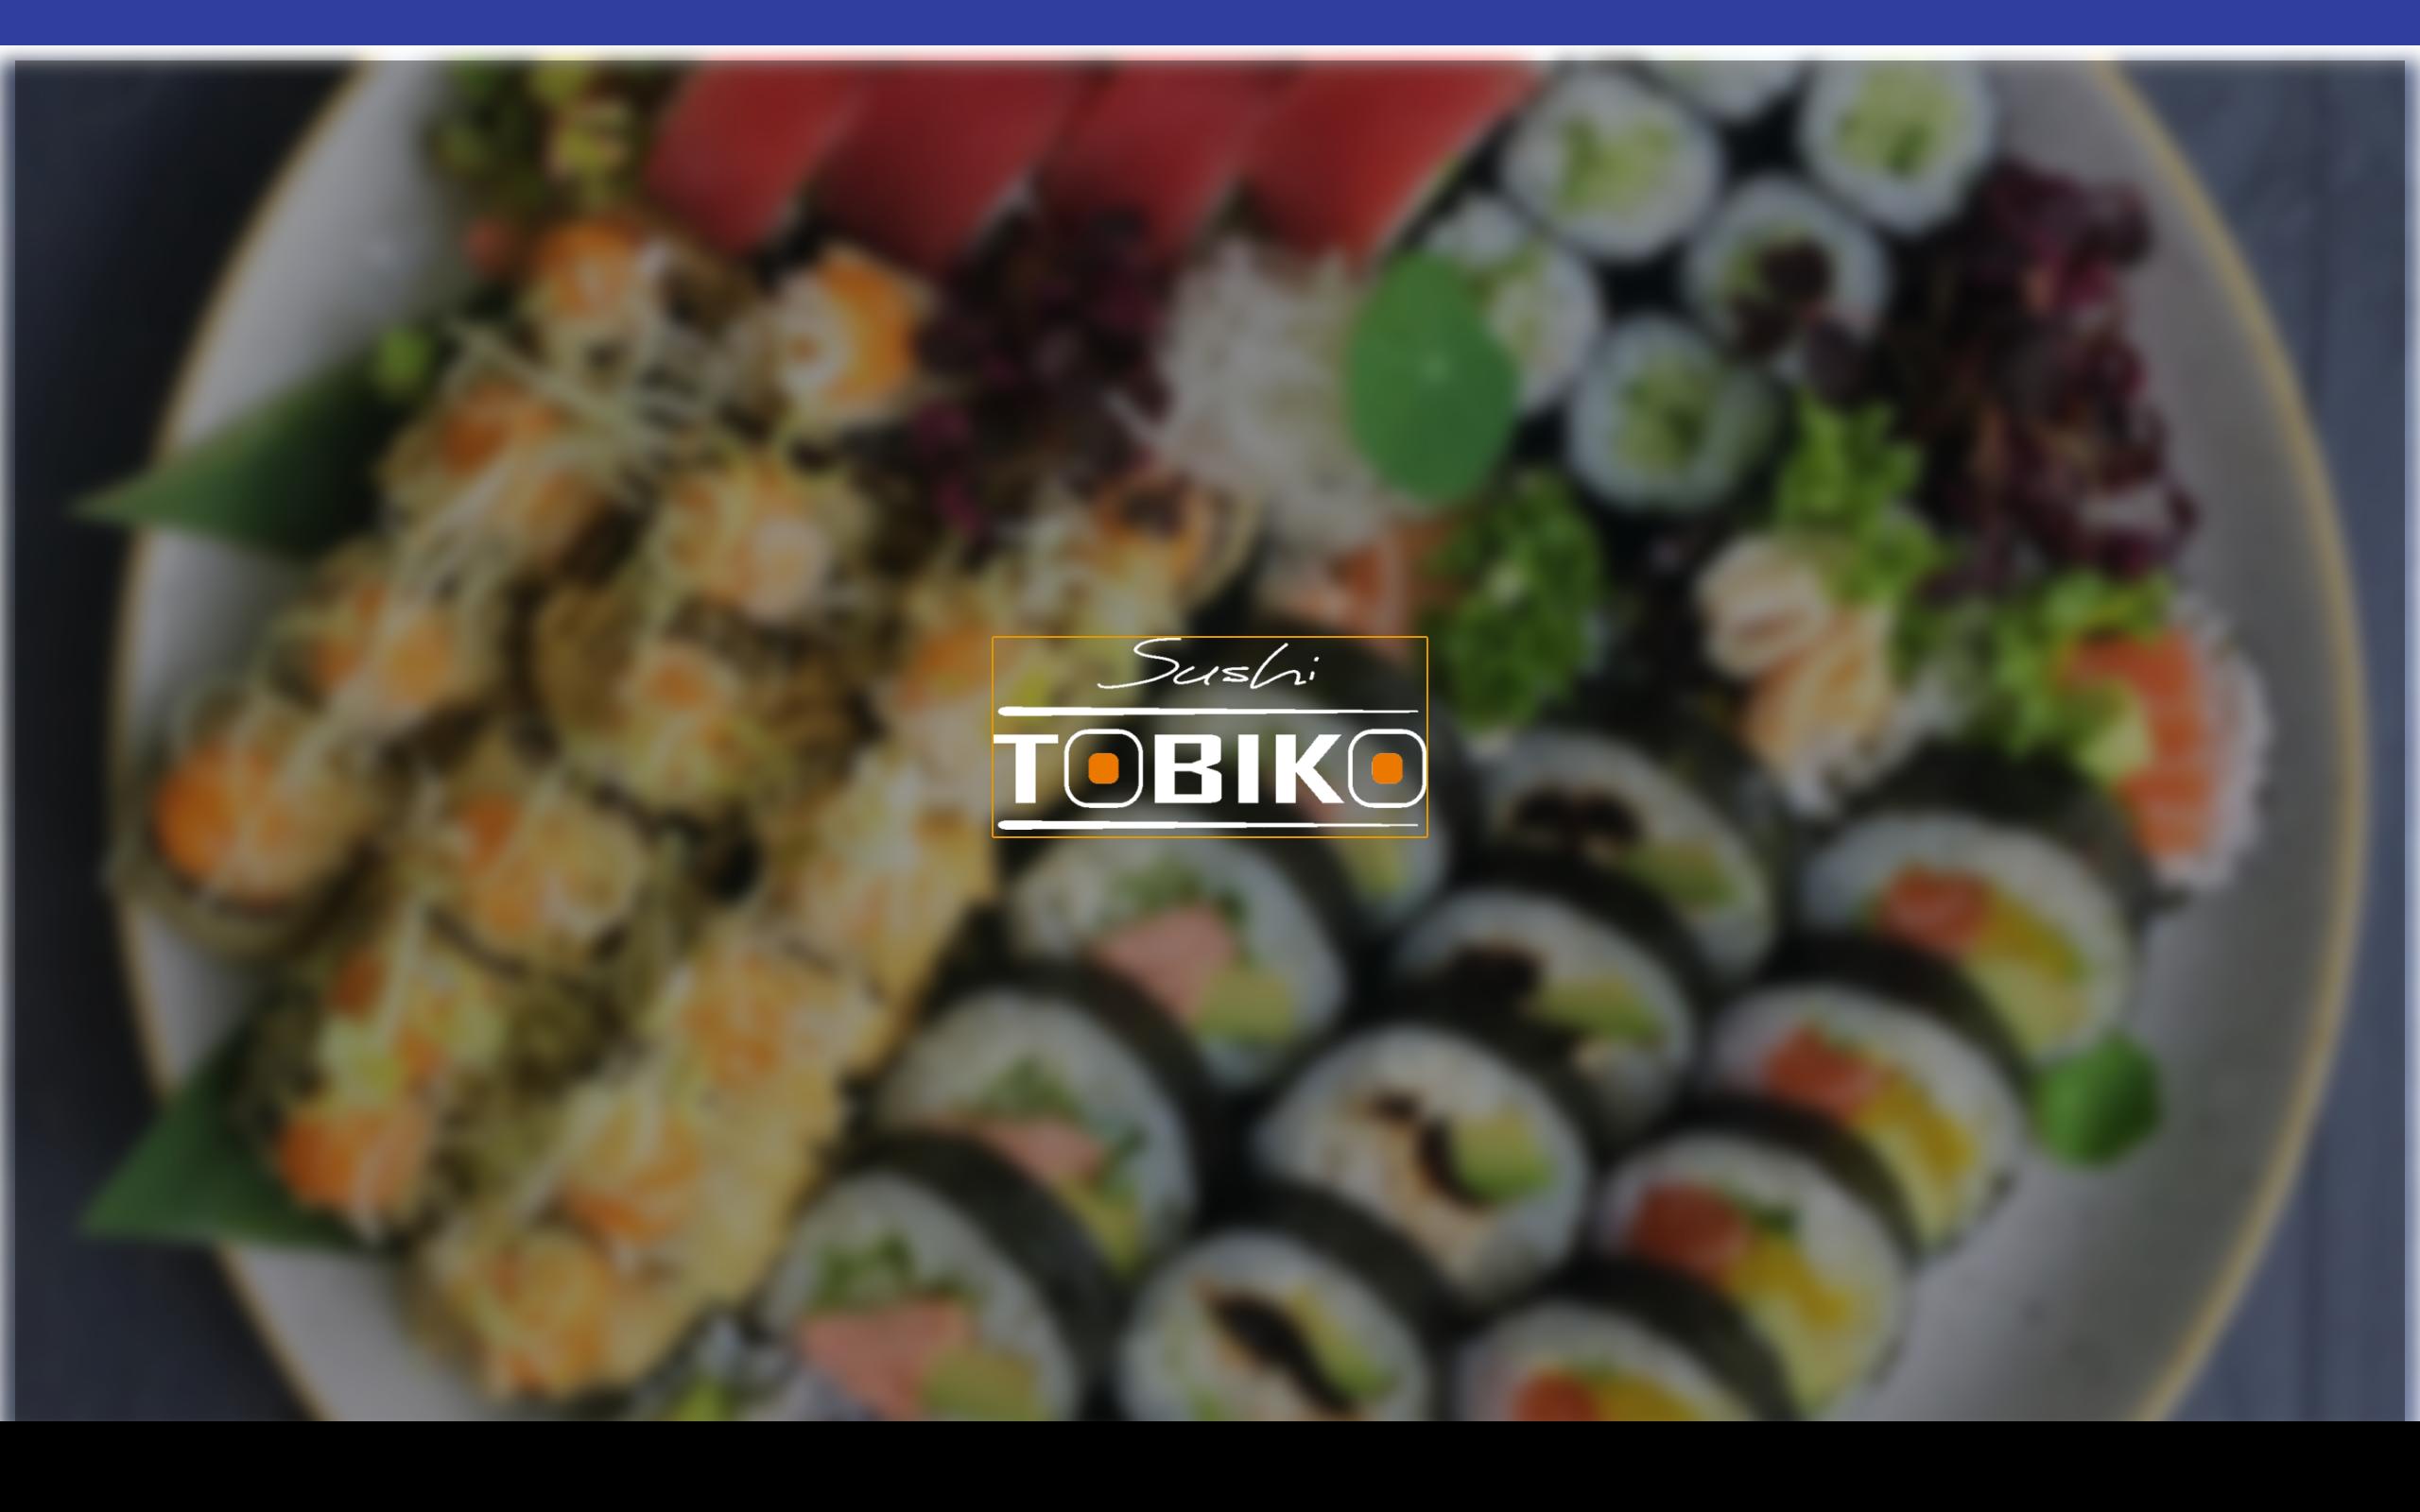 Tobiko Sushi for Android - APK Download